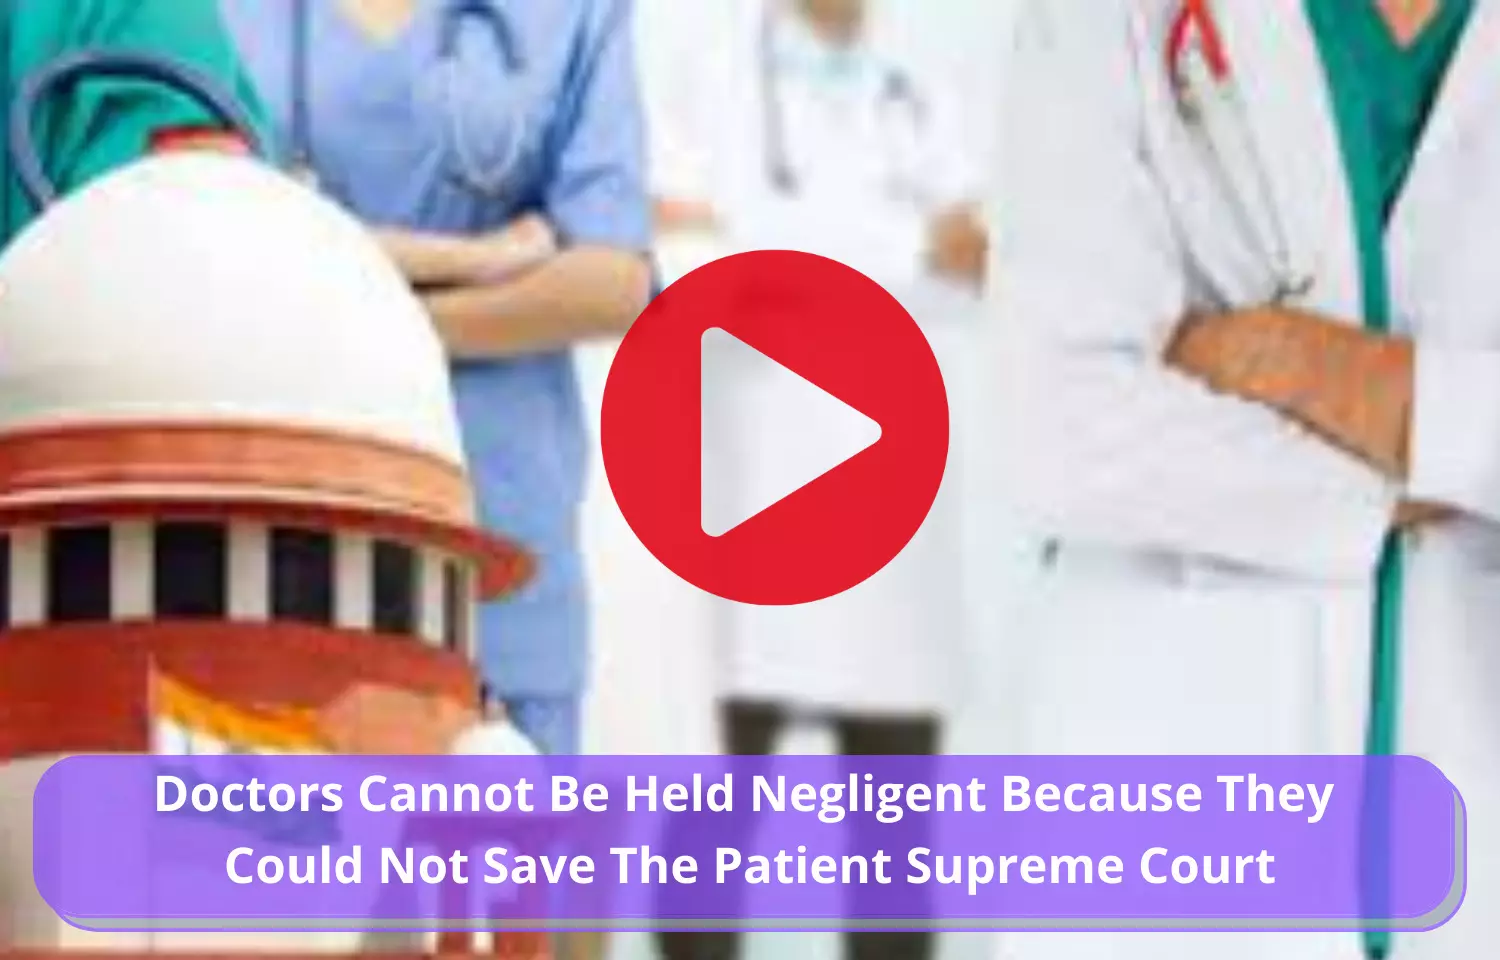 SC says doctors cannot be held negligent because they could not save patient